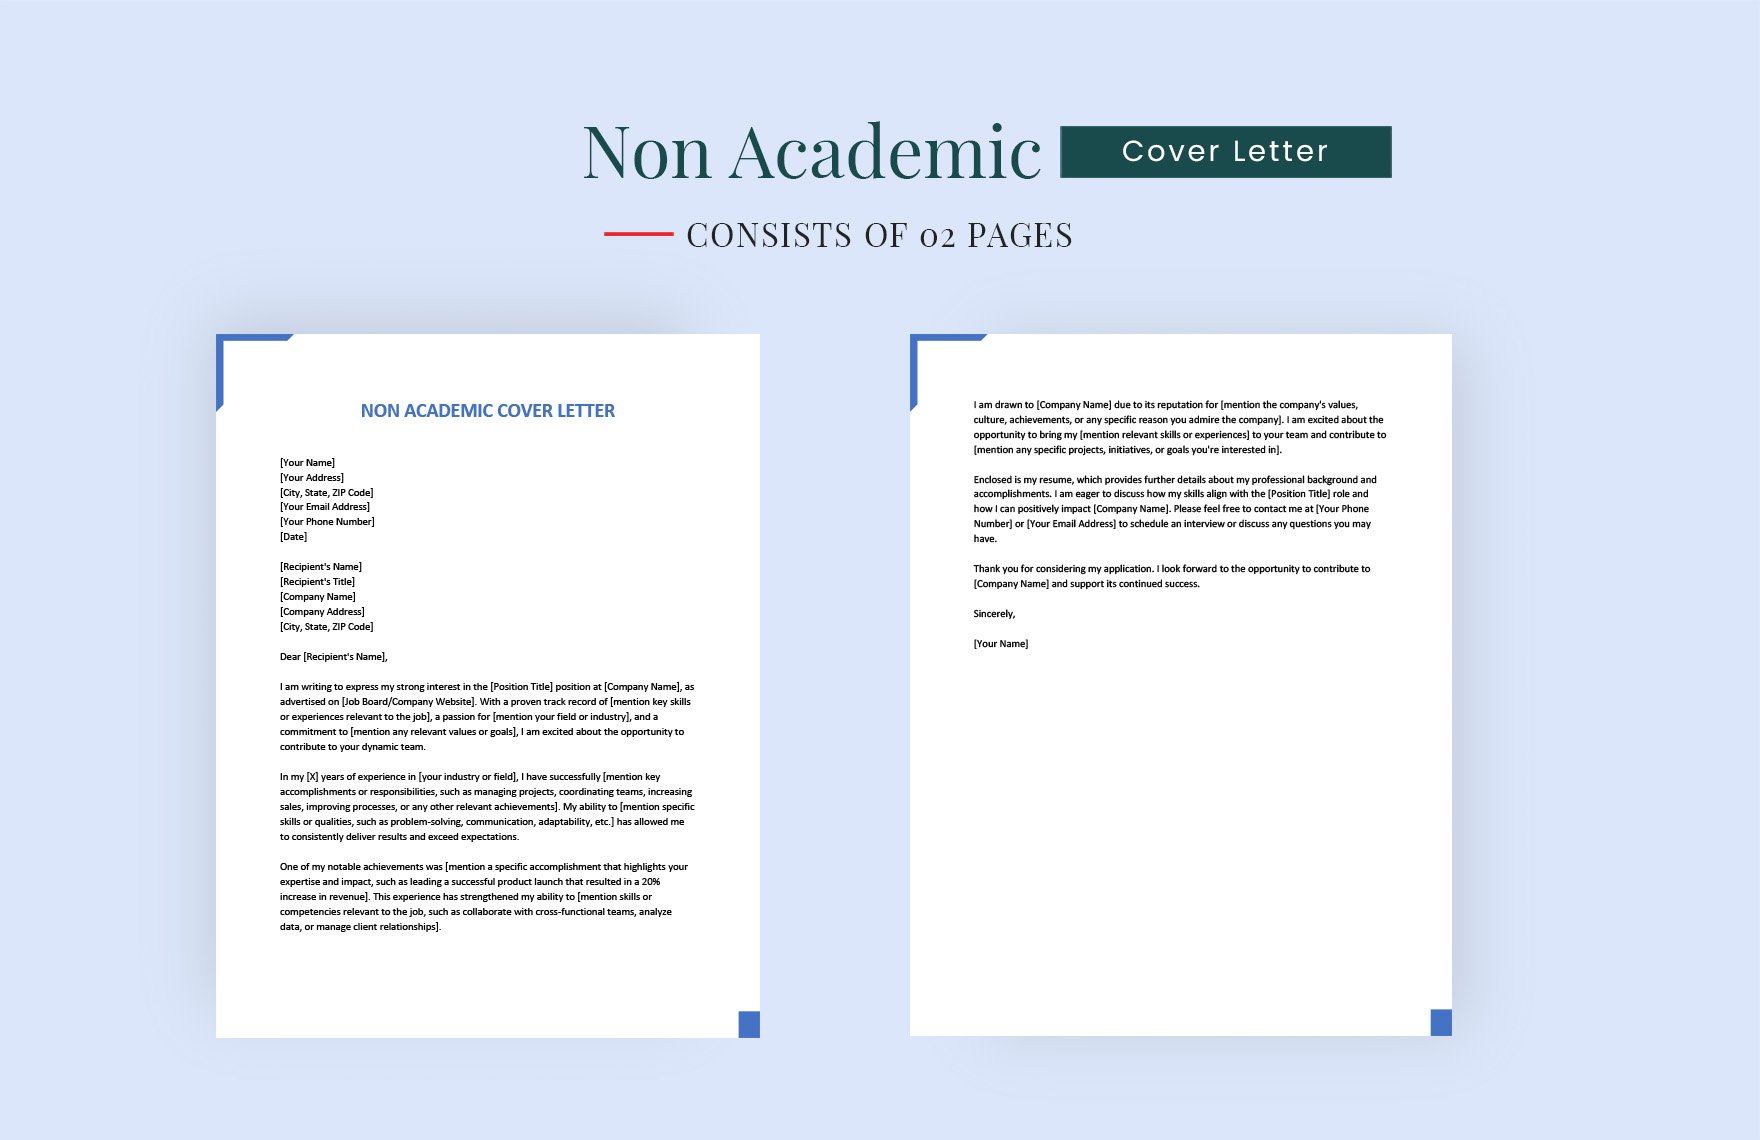 Non Academic Cover Letter in Word, Google Docs